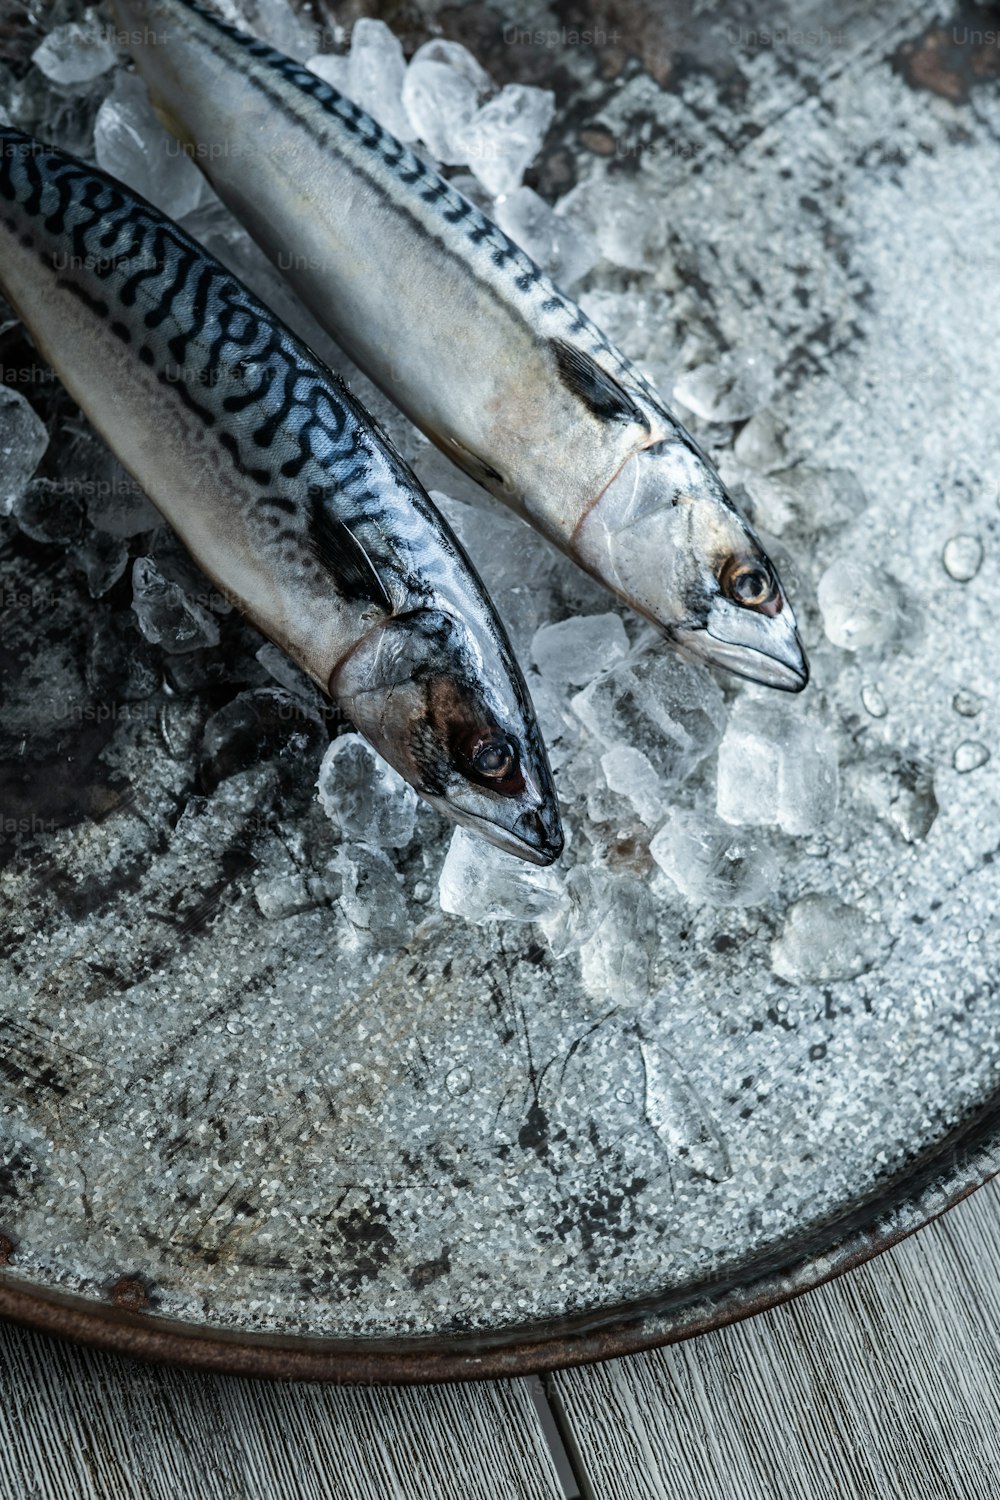 two fish are sitting on ice on a plate